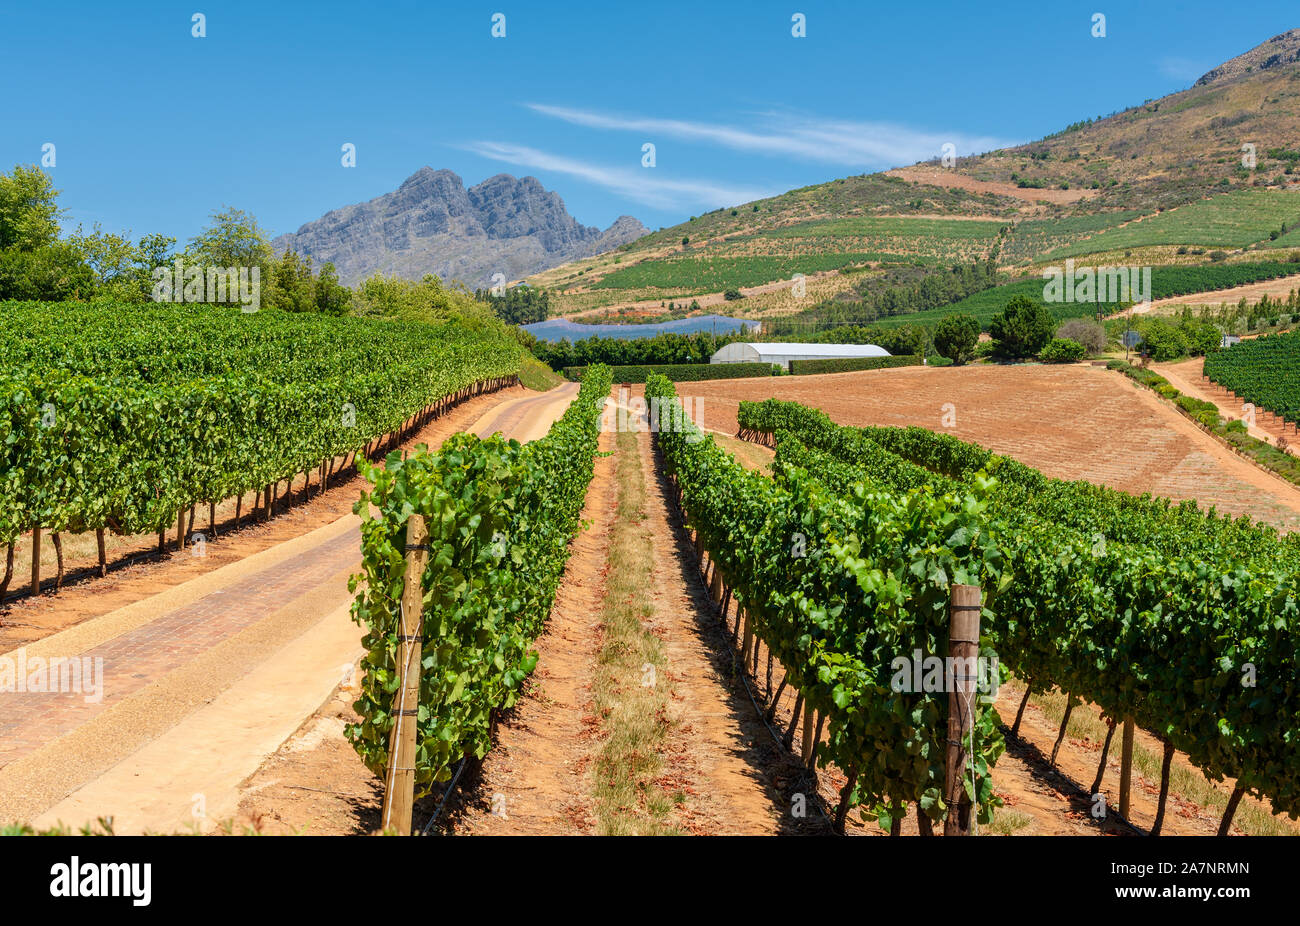 A photo of rows of grapevines in the Stellenbosch wine producing region of South Africa. Stock Photo